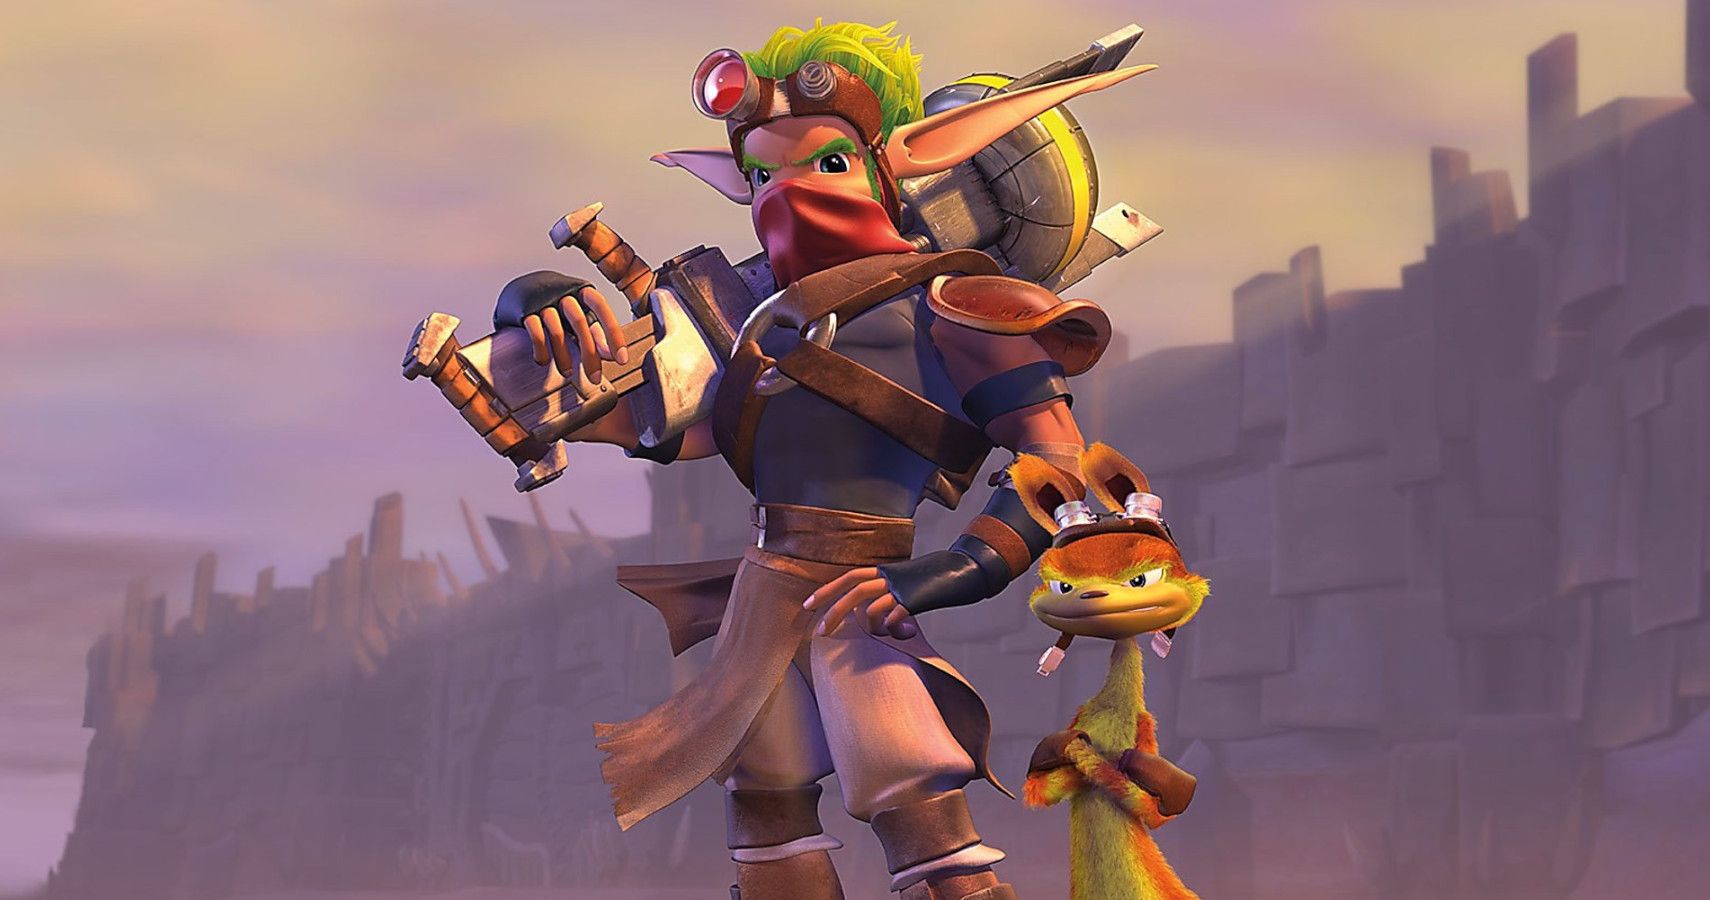 The New Ratchet & Clank Is Making Me Nostalgic For Jak And Daxter